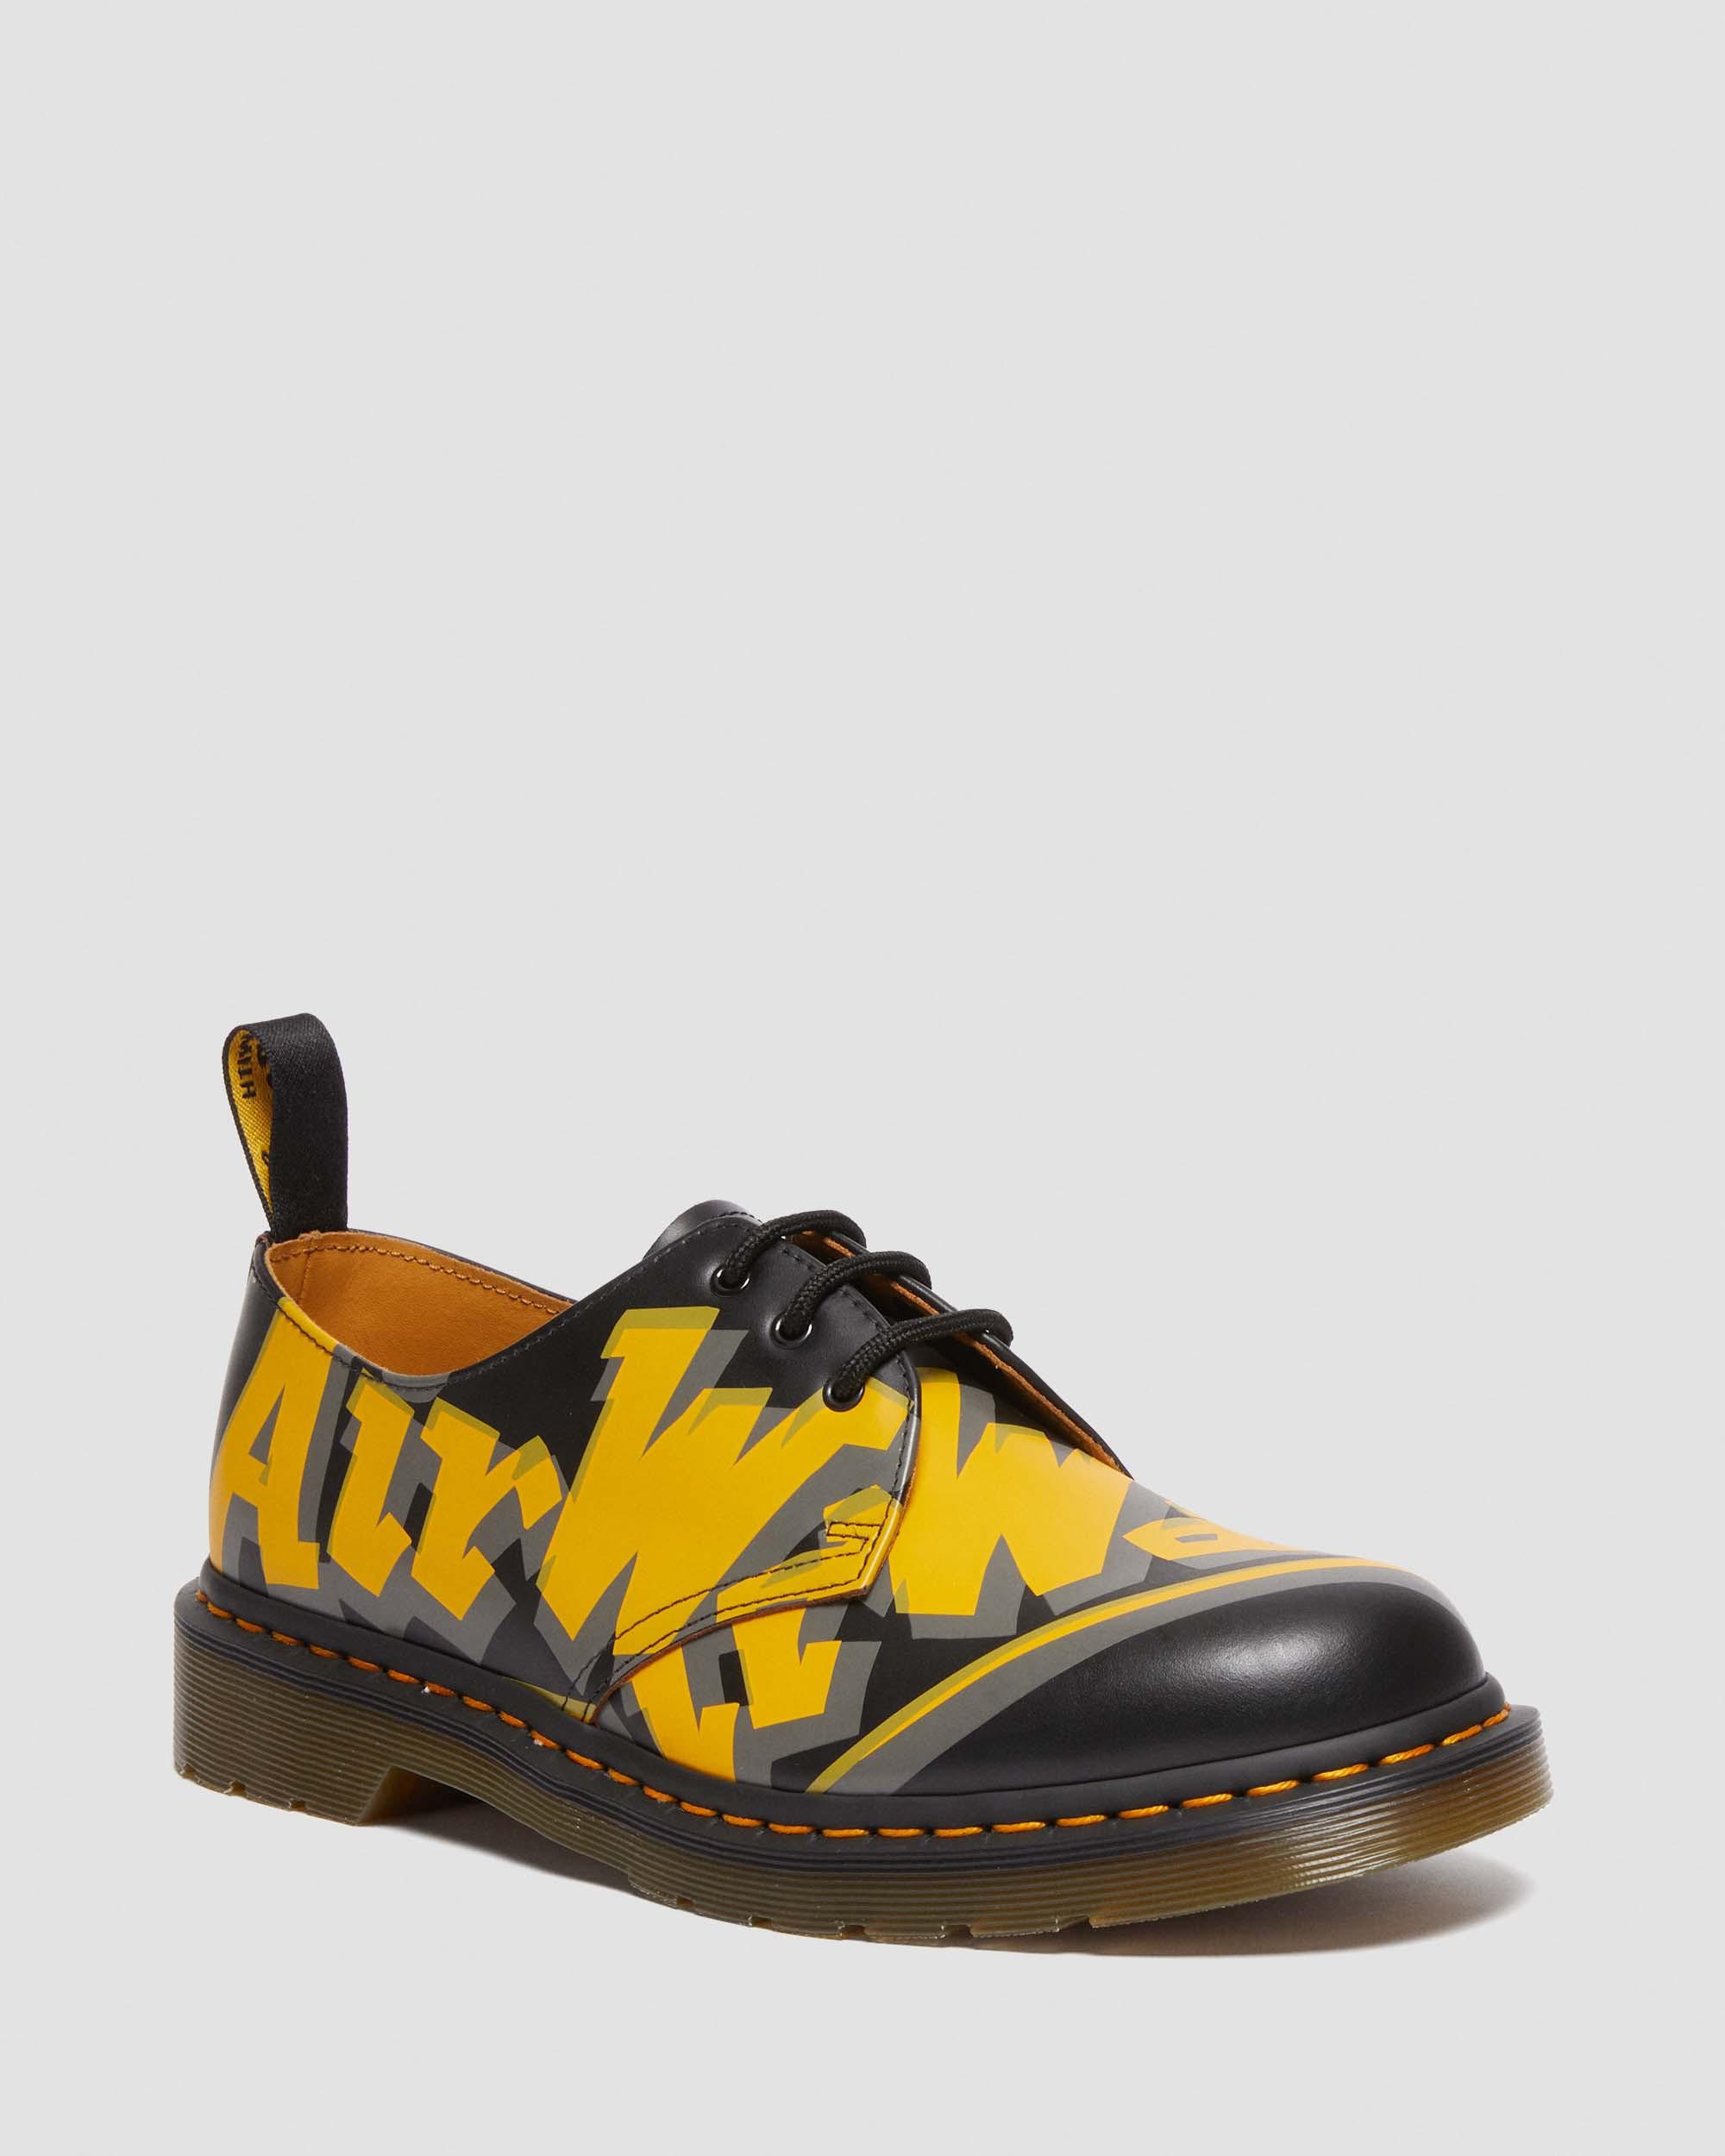 Dr. Martens, 1461 Airwair Vintage Smooth Leather Oxford Shoes in Black/Gray/Yellow, Size 8